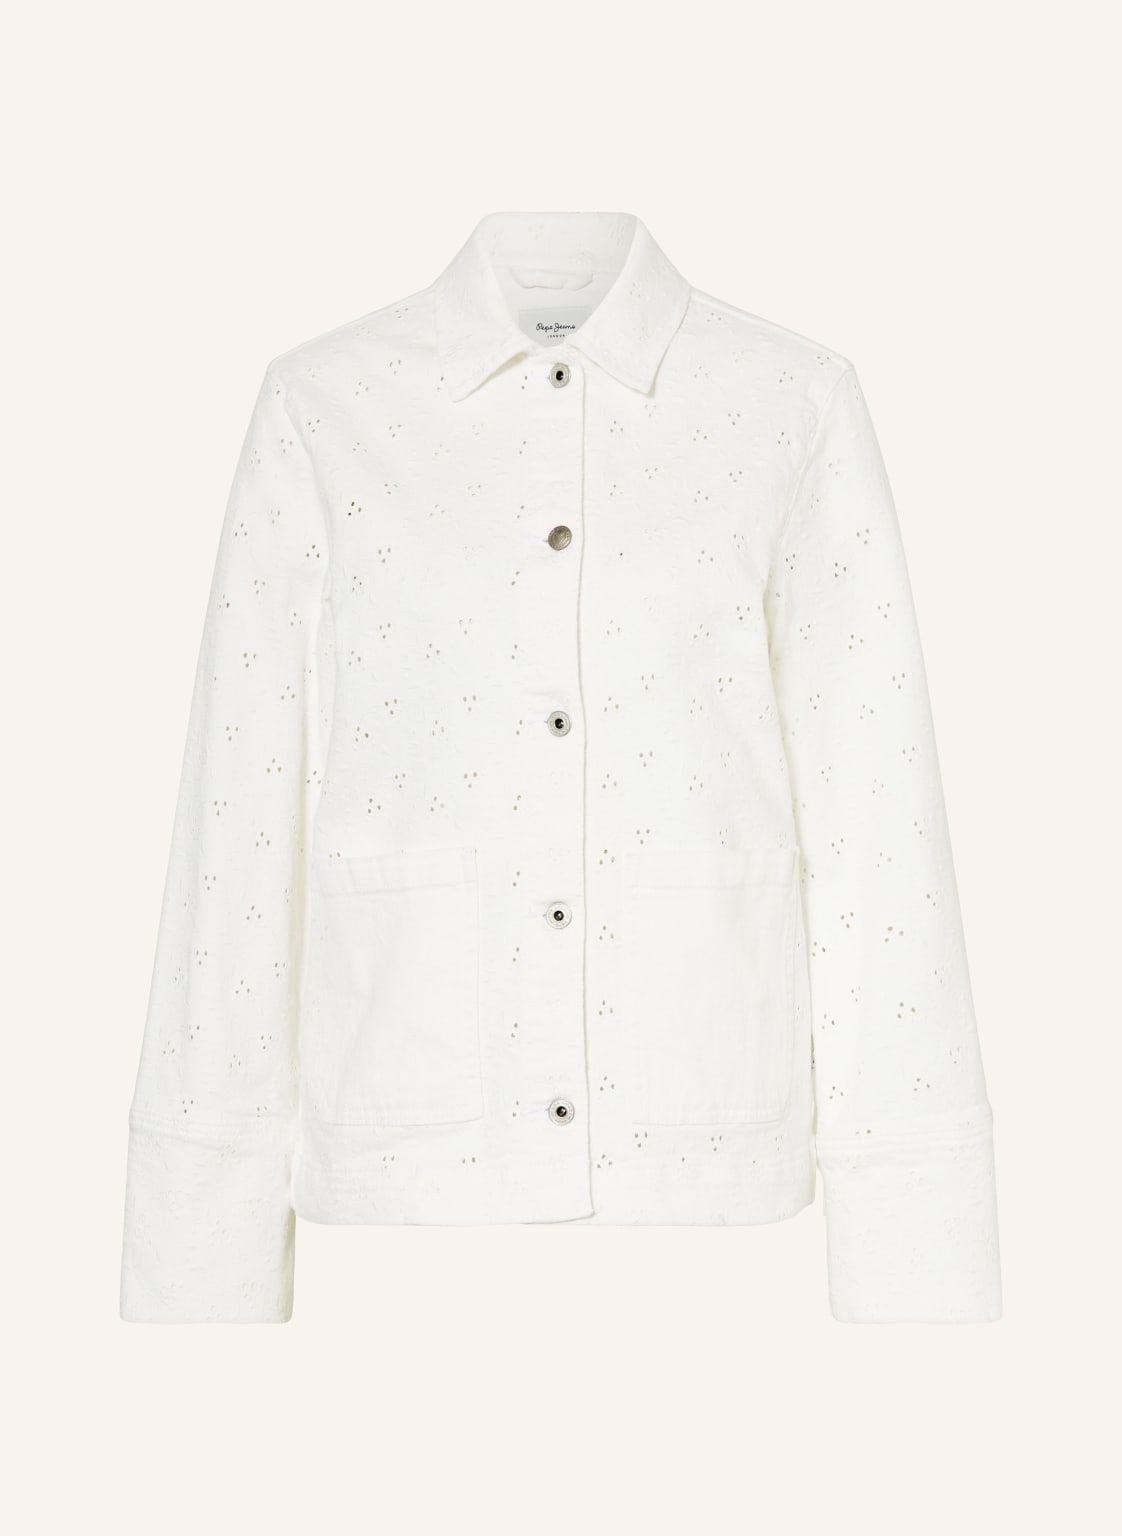 Pepe Jeans Jeansjacke Anny weiss von Pepe Jeans